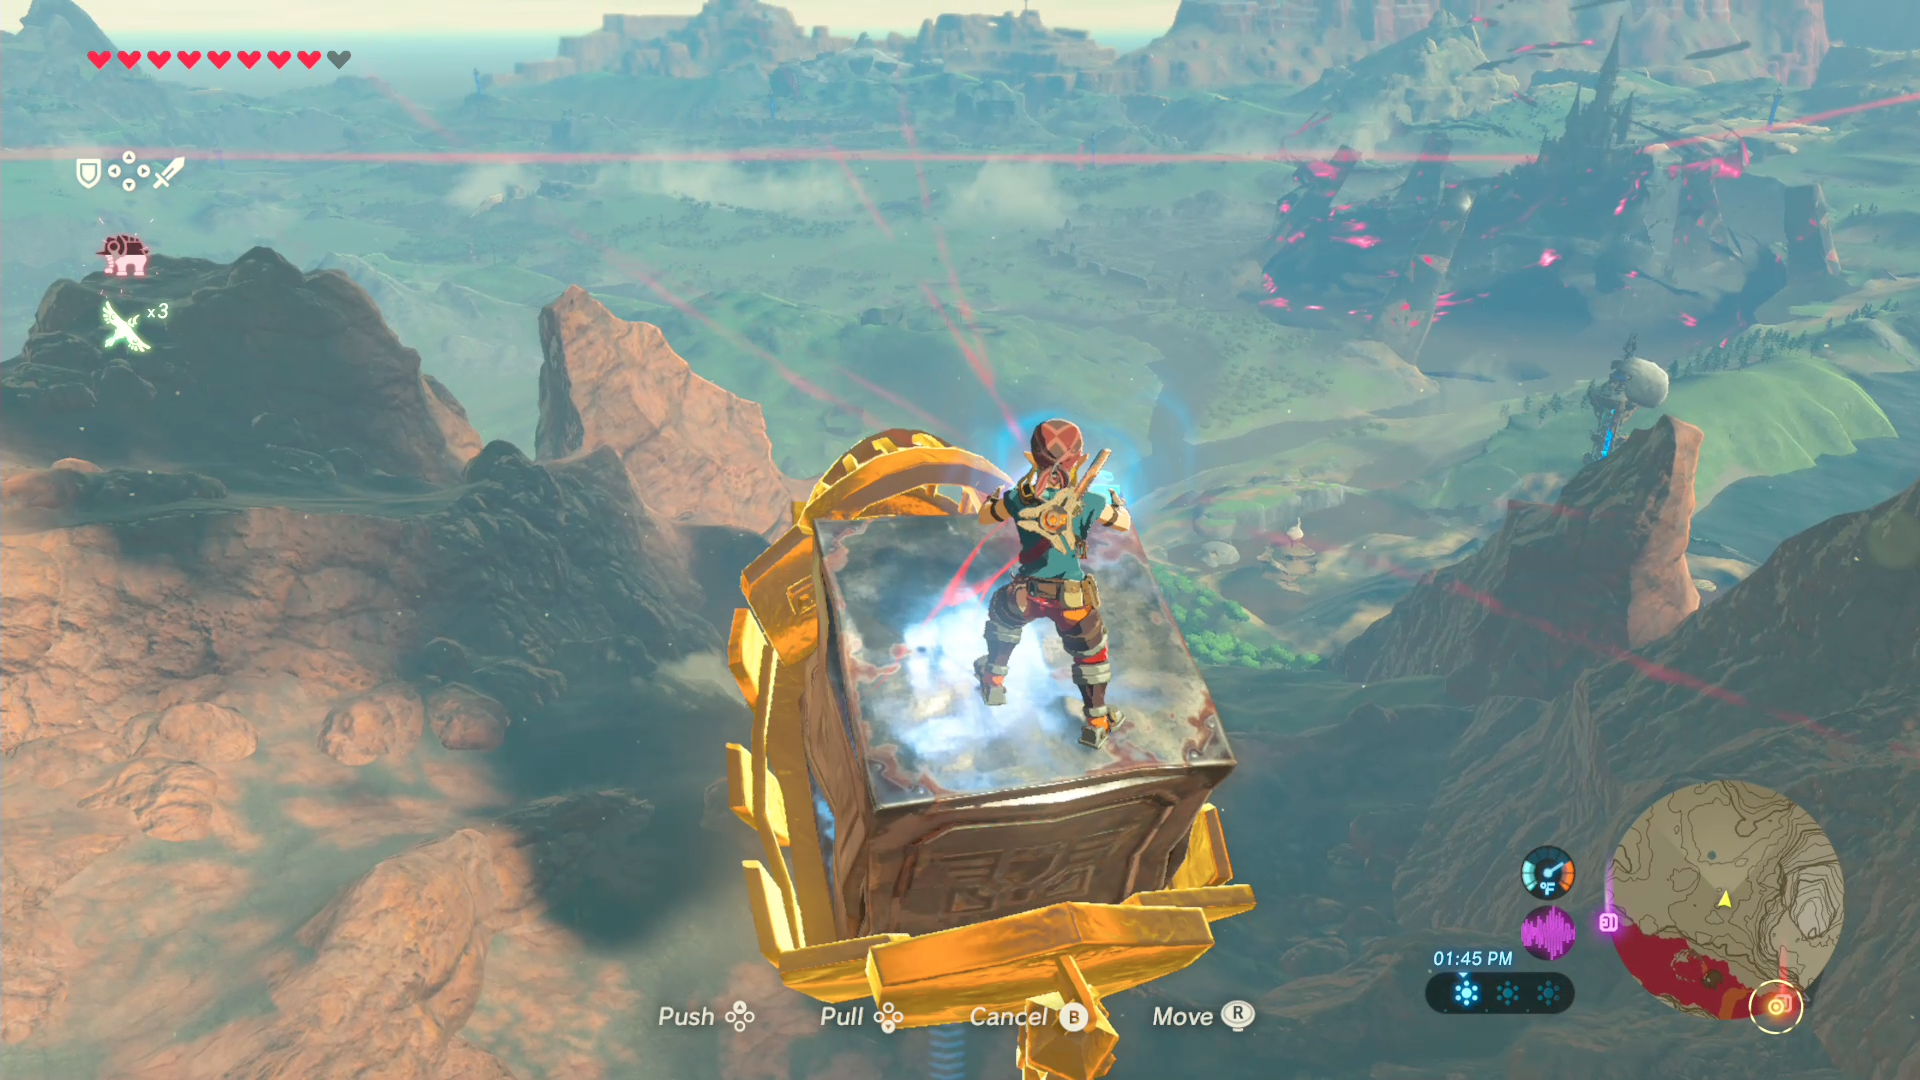 Next level Hylian airship technology, right here.